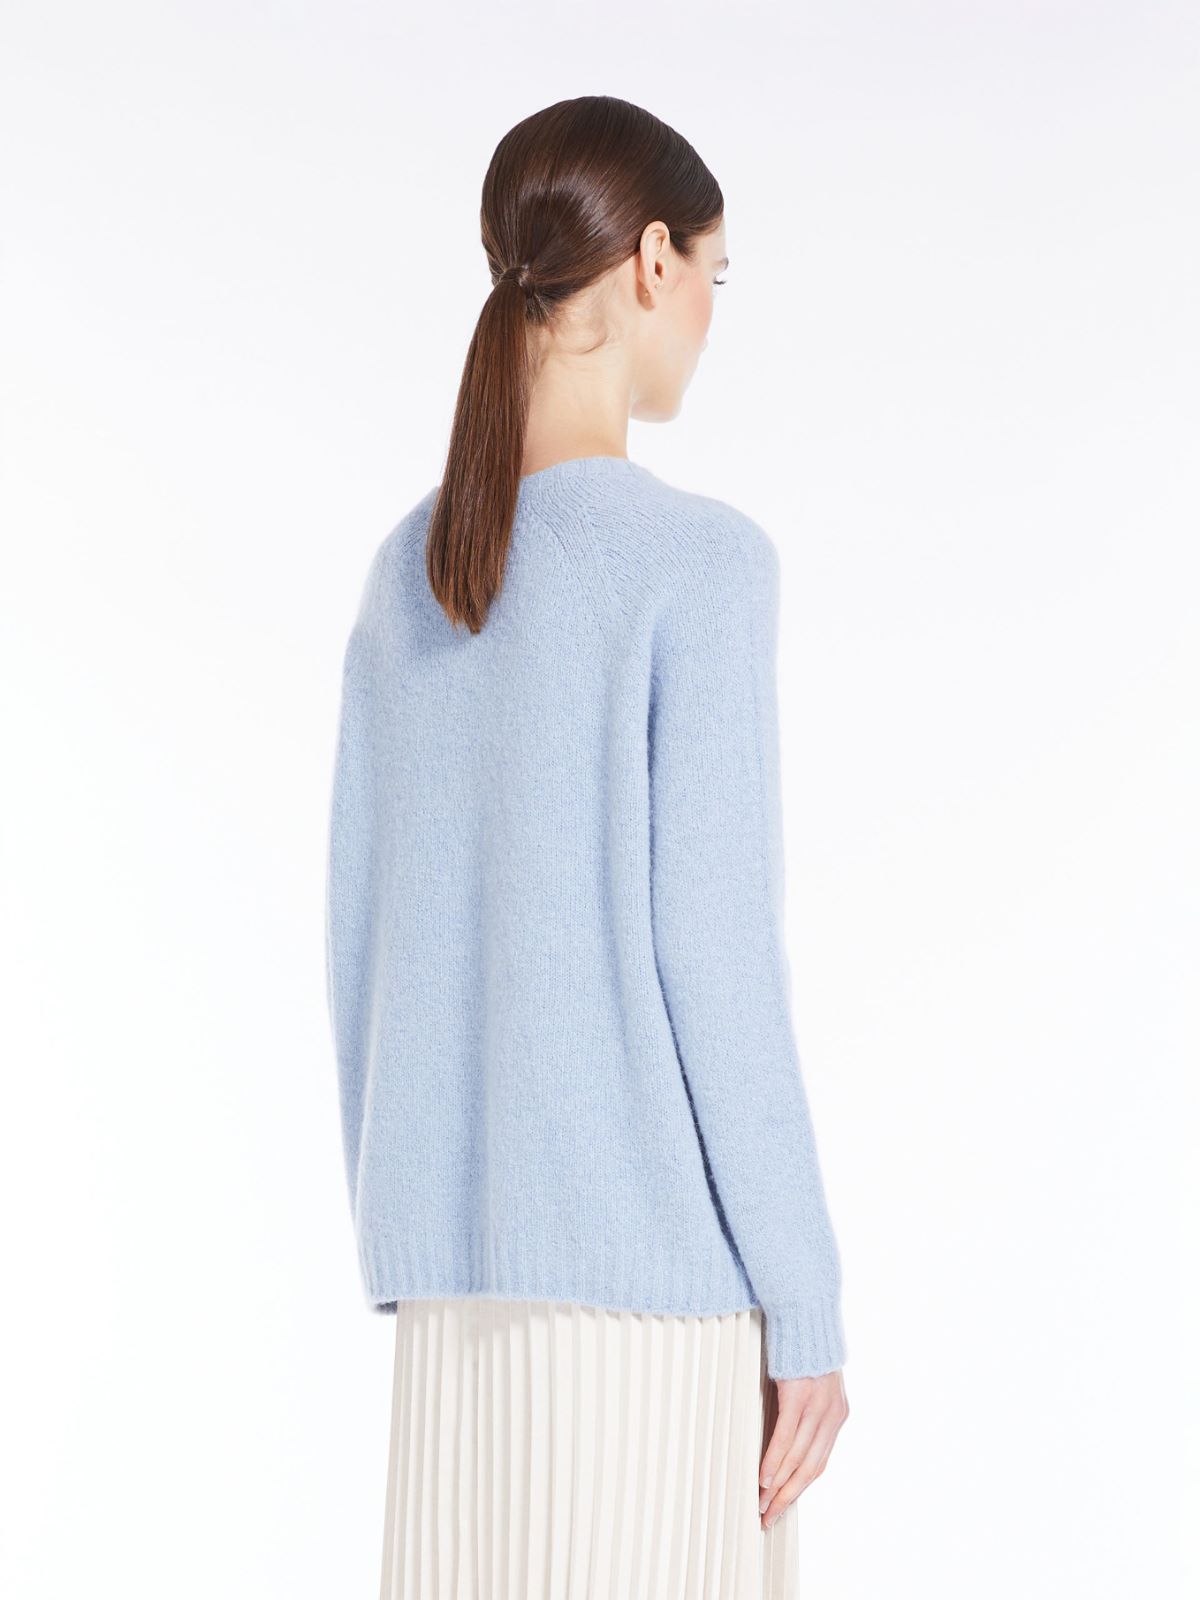 Soft knit top in alpaca and cotton - LIGHT BLUE - Weekend Max Mara - 3